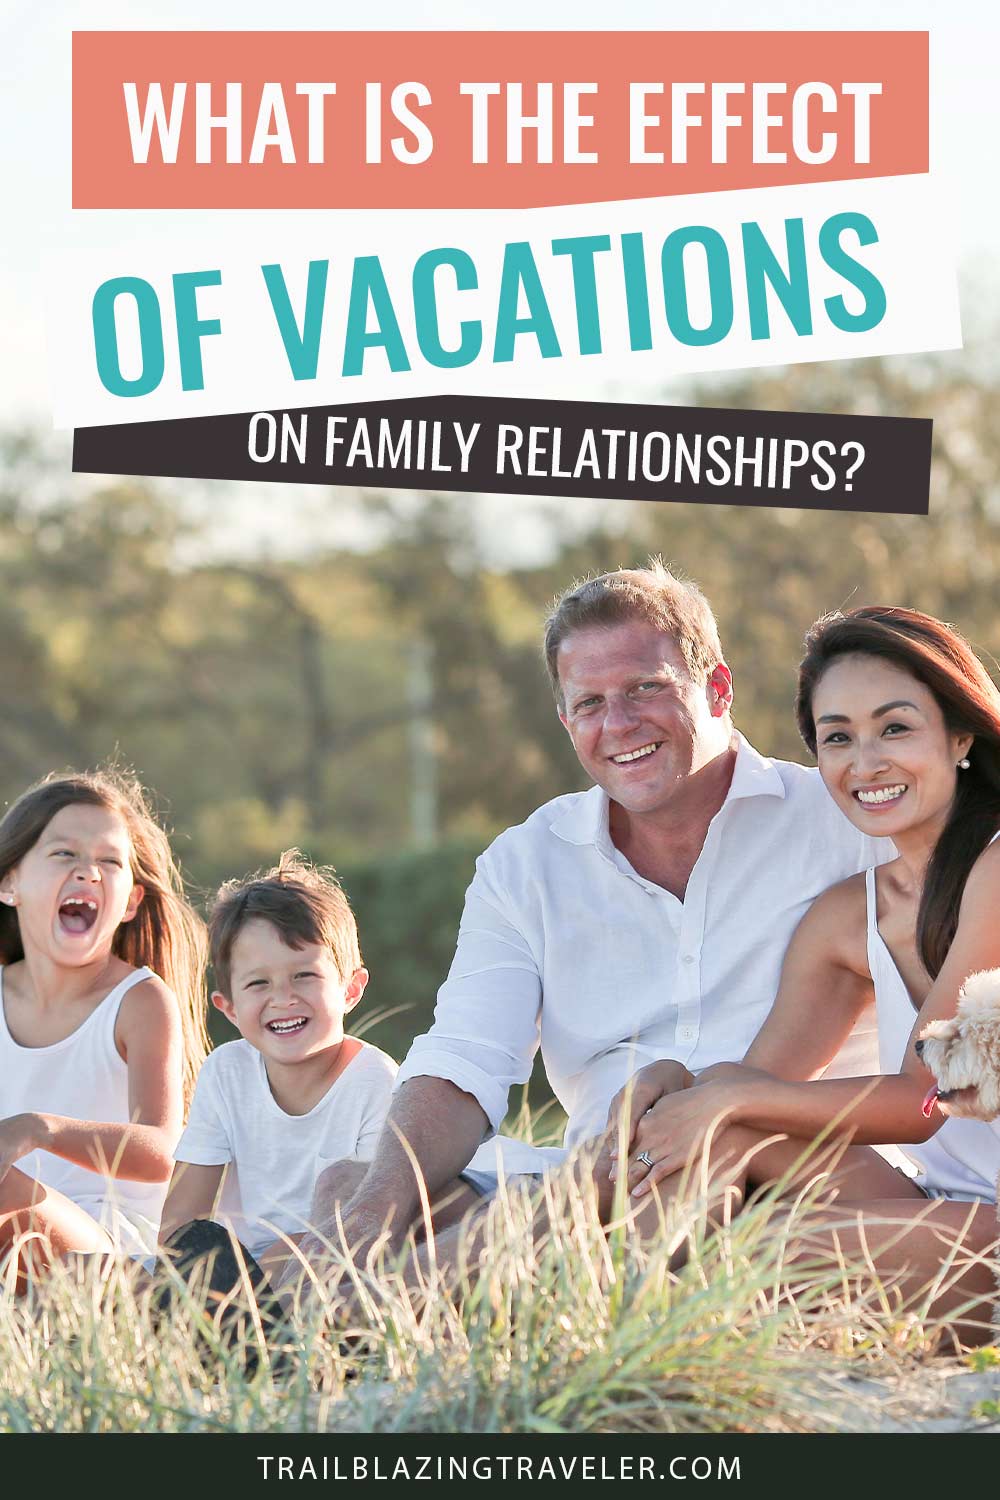 What Is The Effect Of Vacations On Family Relationships?